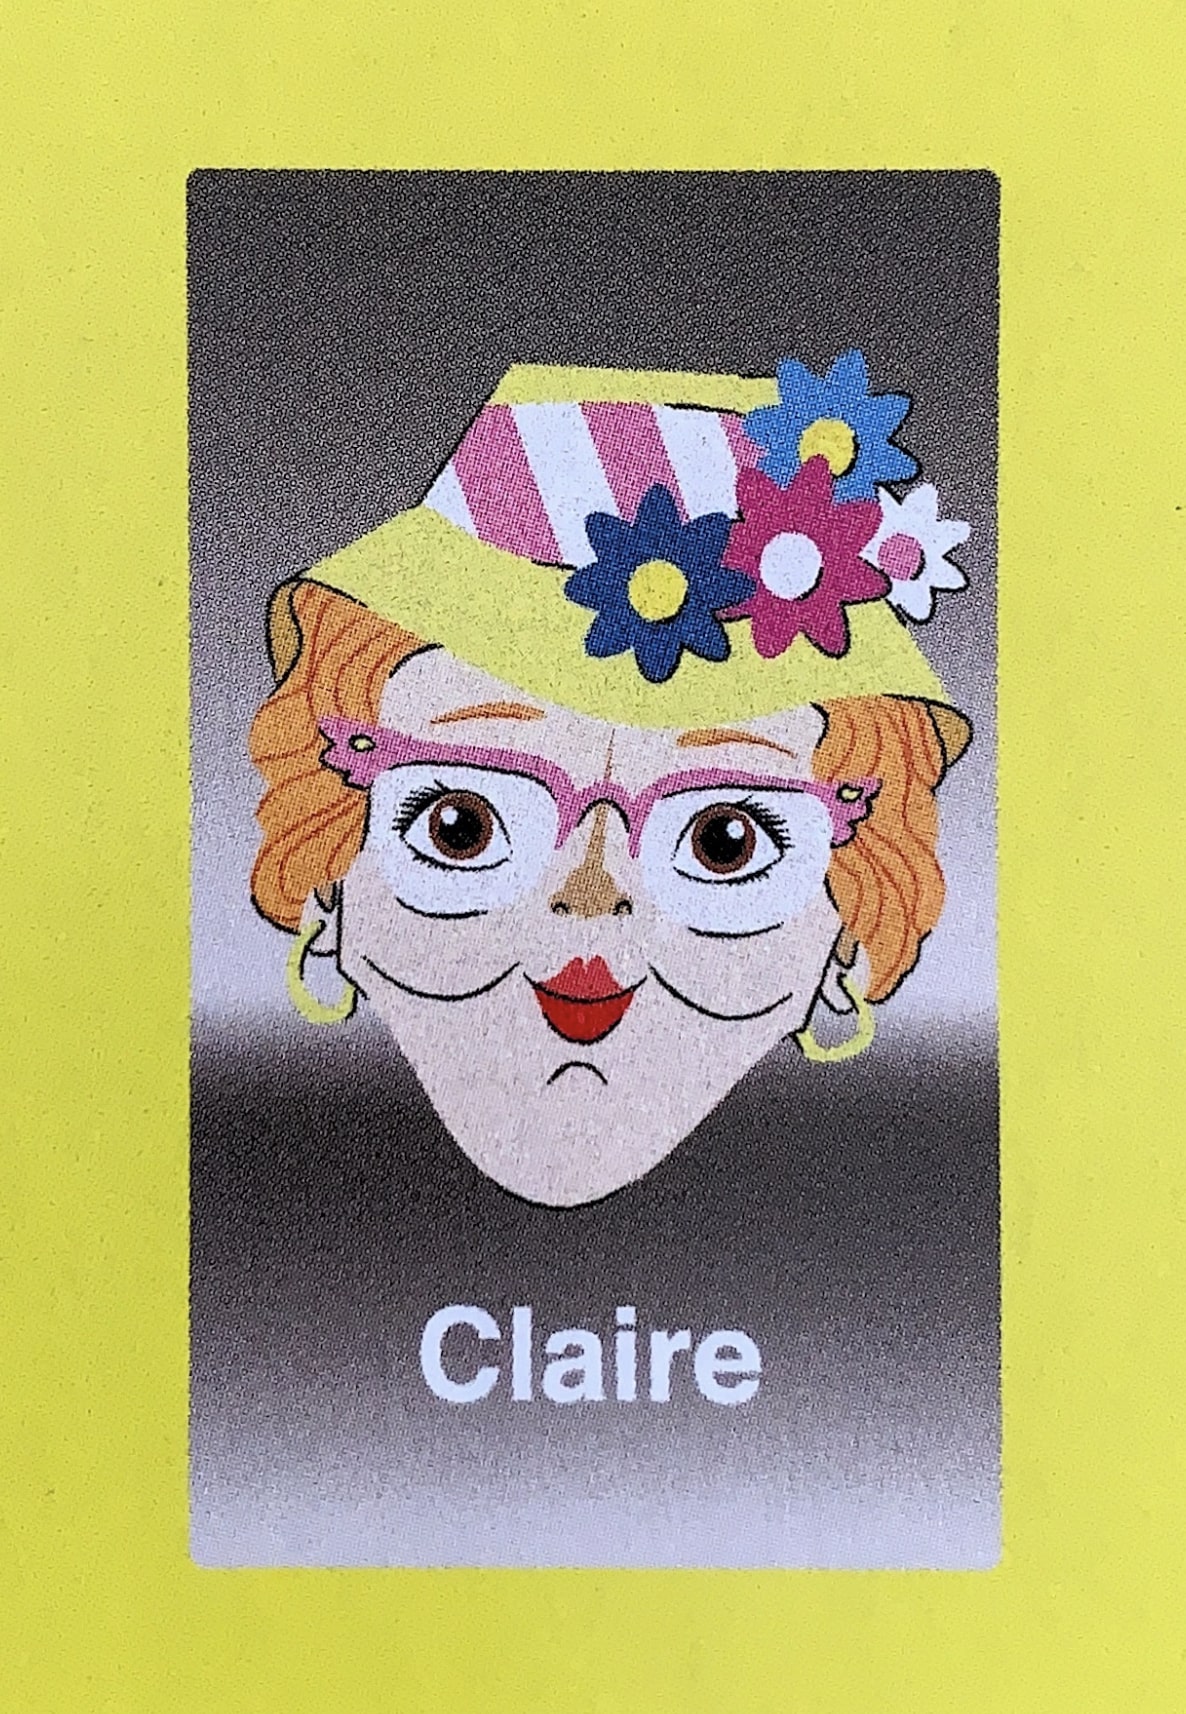  - Claire always stayed humble despite the attention lavished upon her and the other Guess Who?® faces. After the early years in the Guess Who?® spotlight, she went into business selling her distinctive yellow flowered hats. They were more popular than even she could have predicted, and after investing her money wisely, she is officially the wealthiest Guess Who?® personality. Rumor has it she subsequently built a room full of gold, where she spends most of her days lounging in the soft metallic stacks.